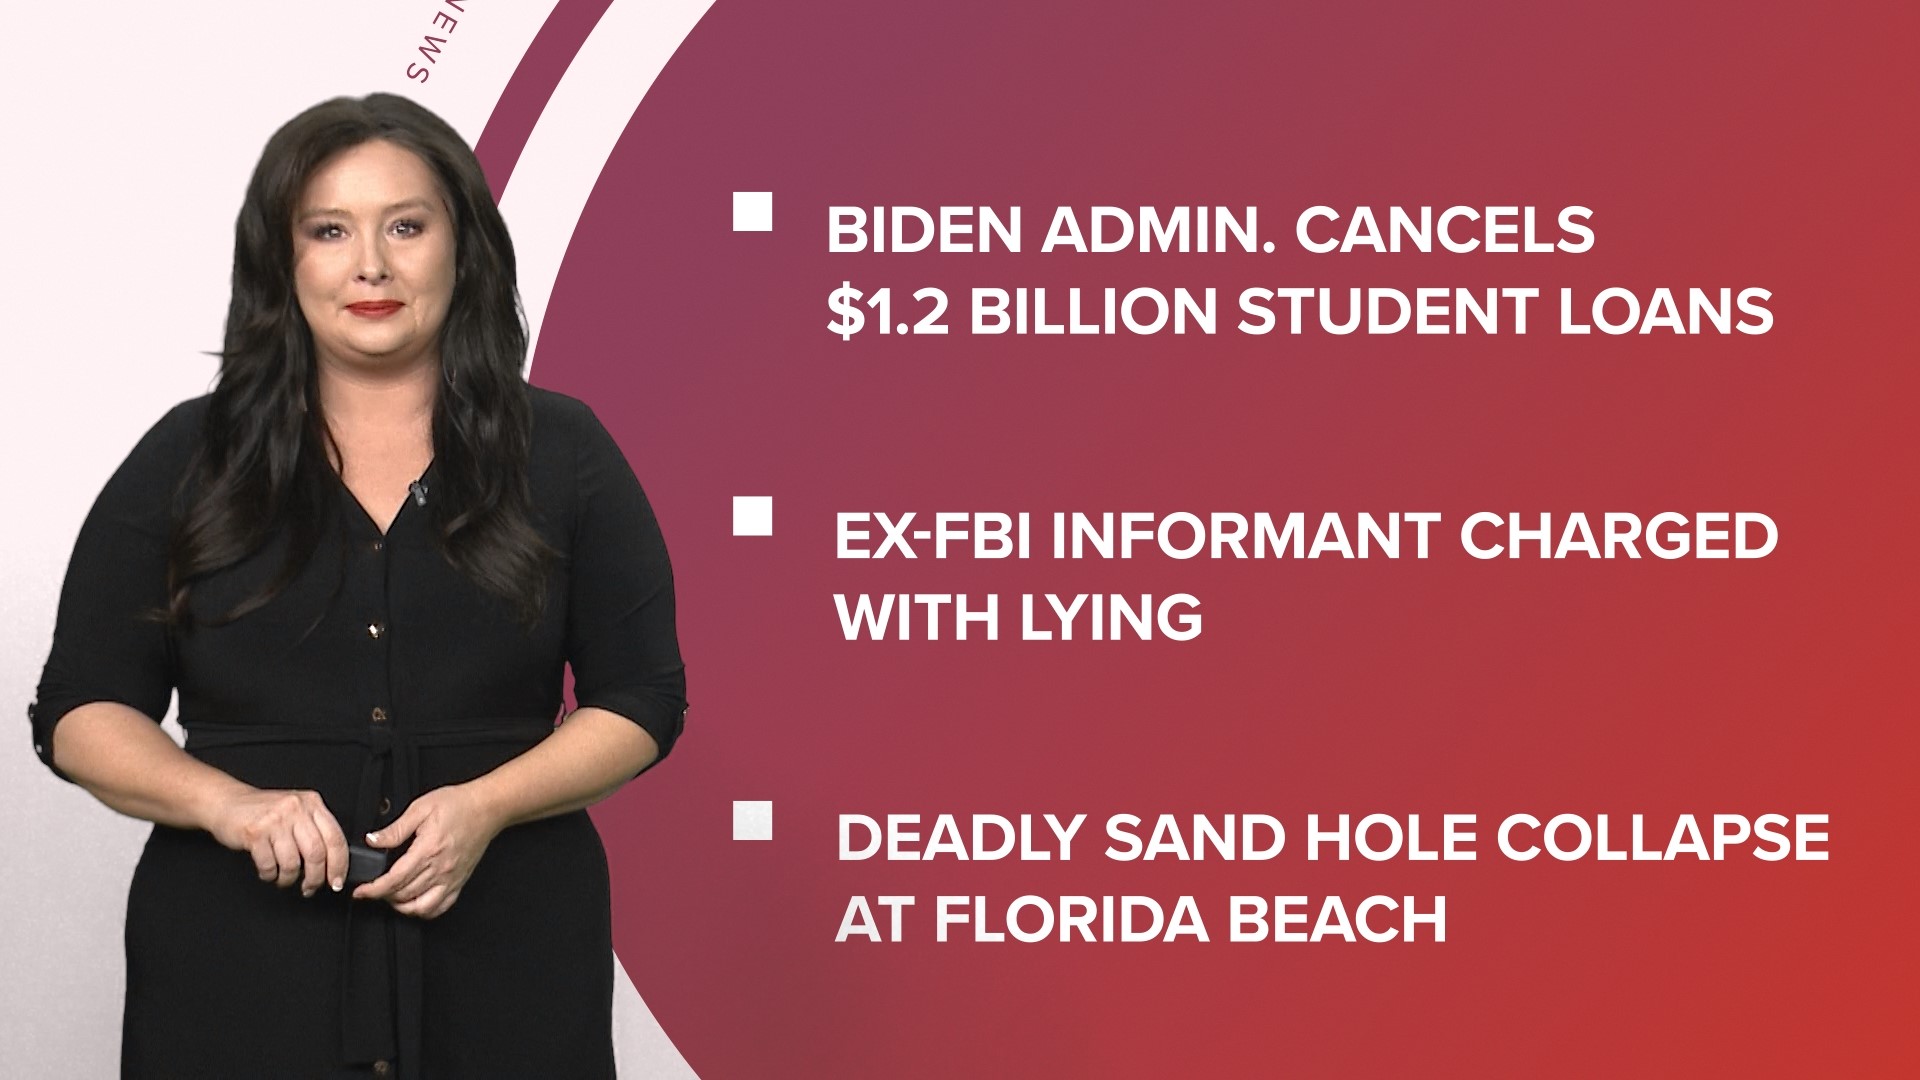 A look at some top news headlines from the Biden administration canceling $1.2B in student loans to a deadly sand hole collapse and Pandas to return to San Diego.